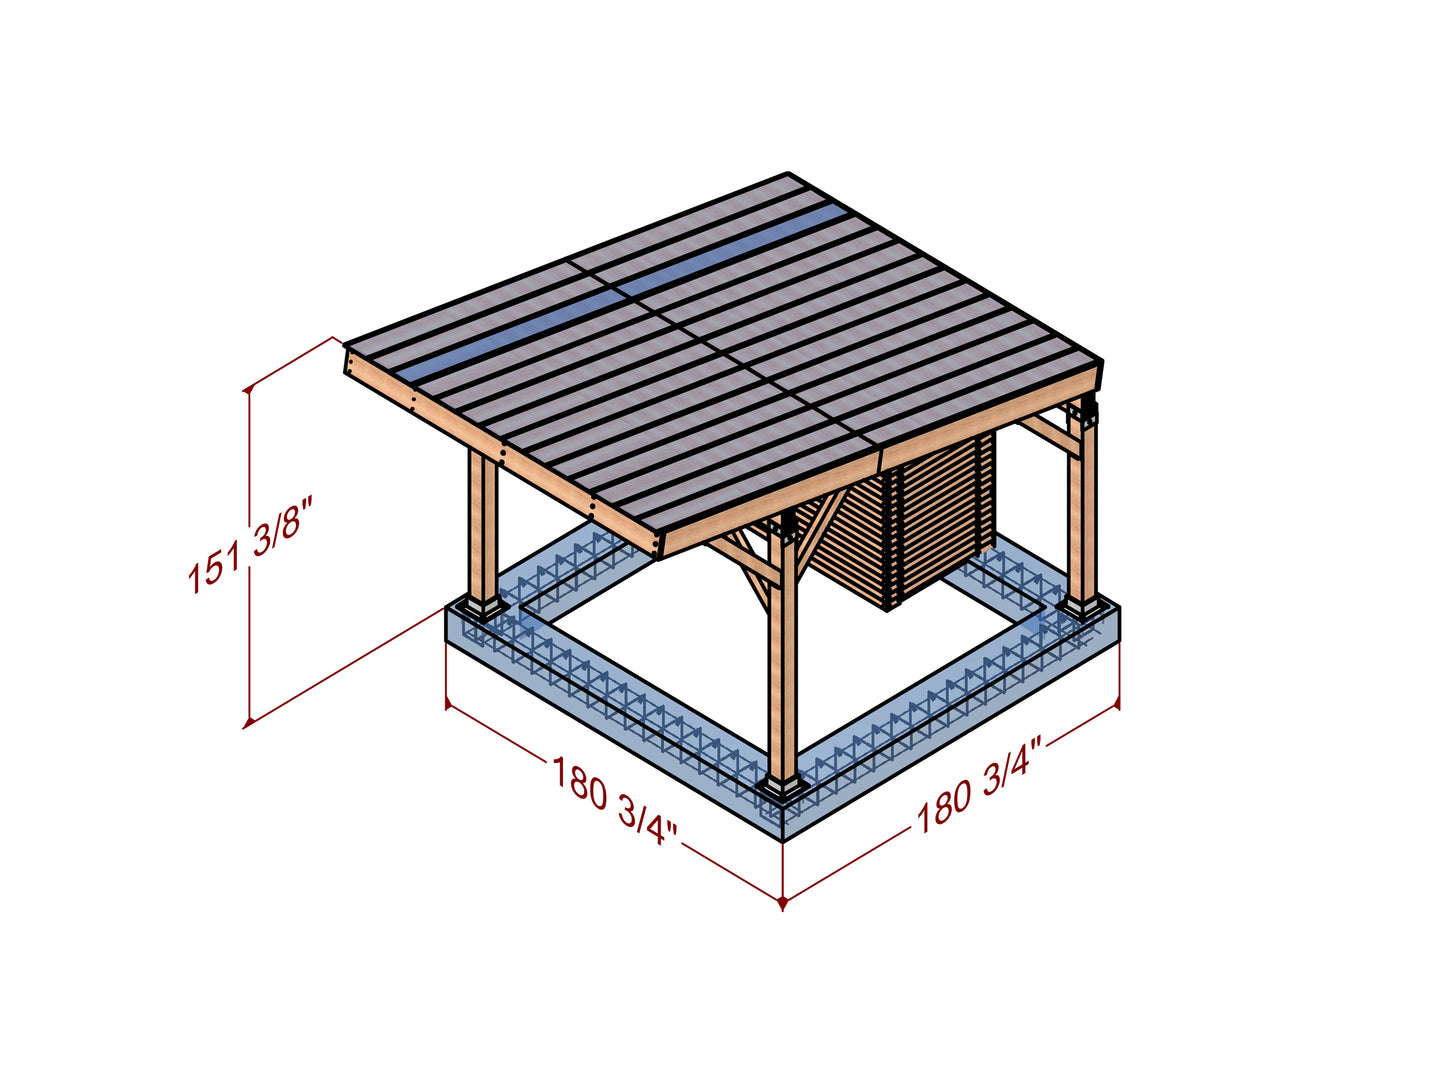 Build Your Dream 14'x14' Garage with Workshop & Sloped Roof - DIY Carport Plans with Video Guide